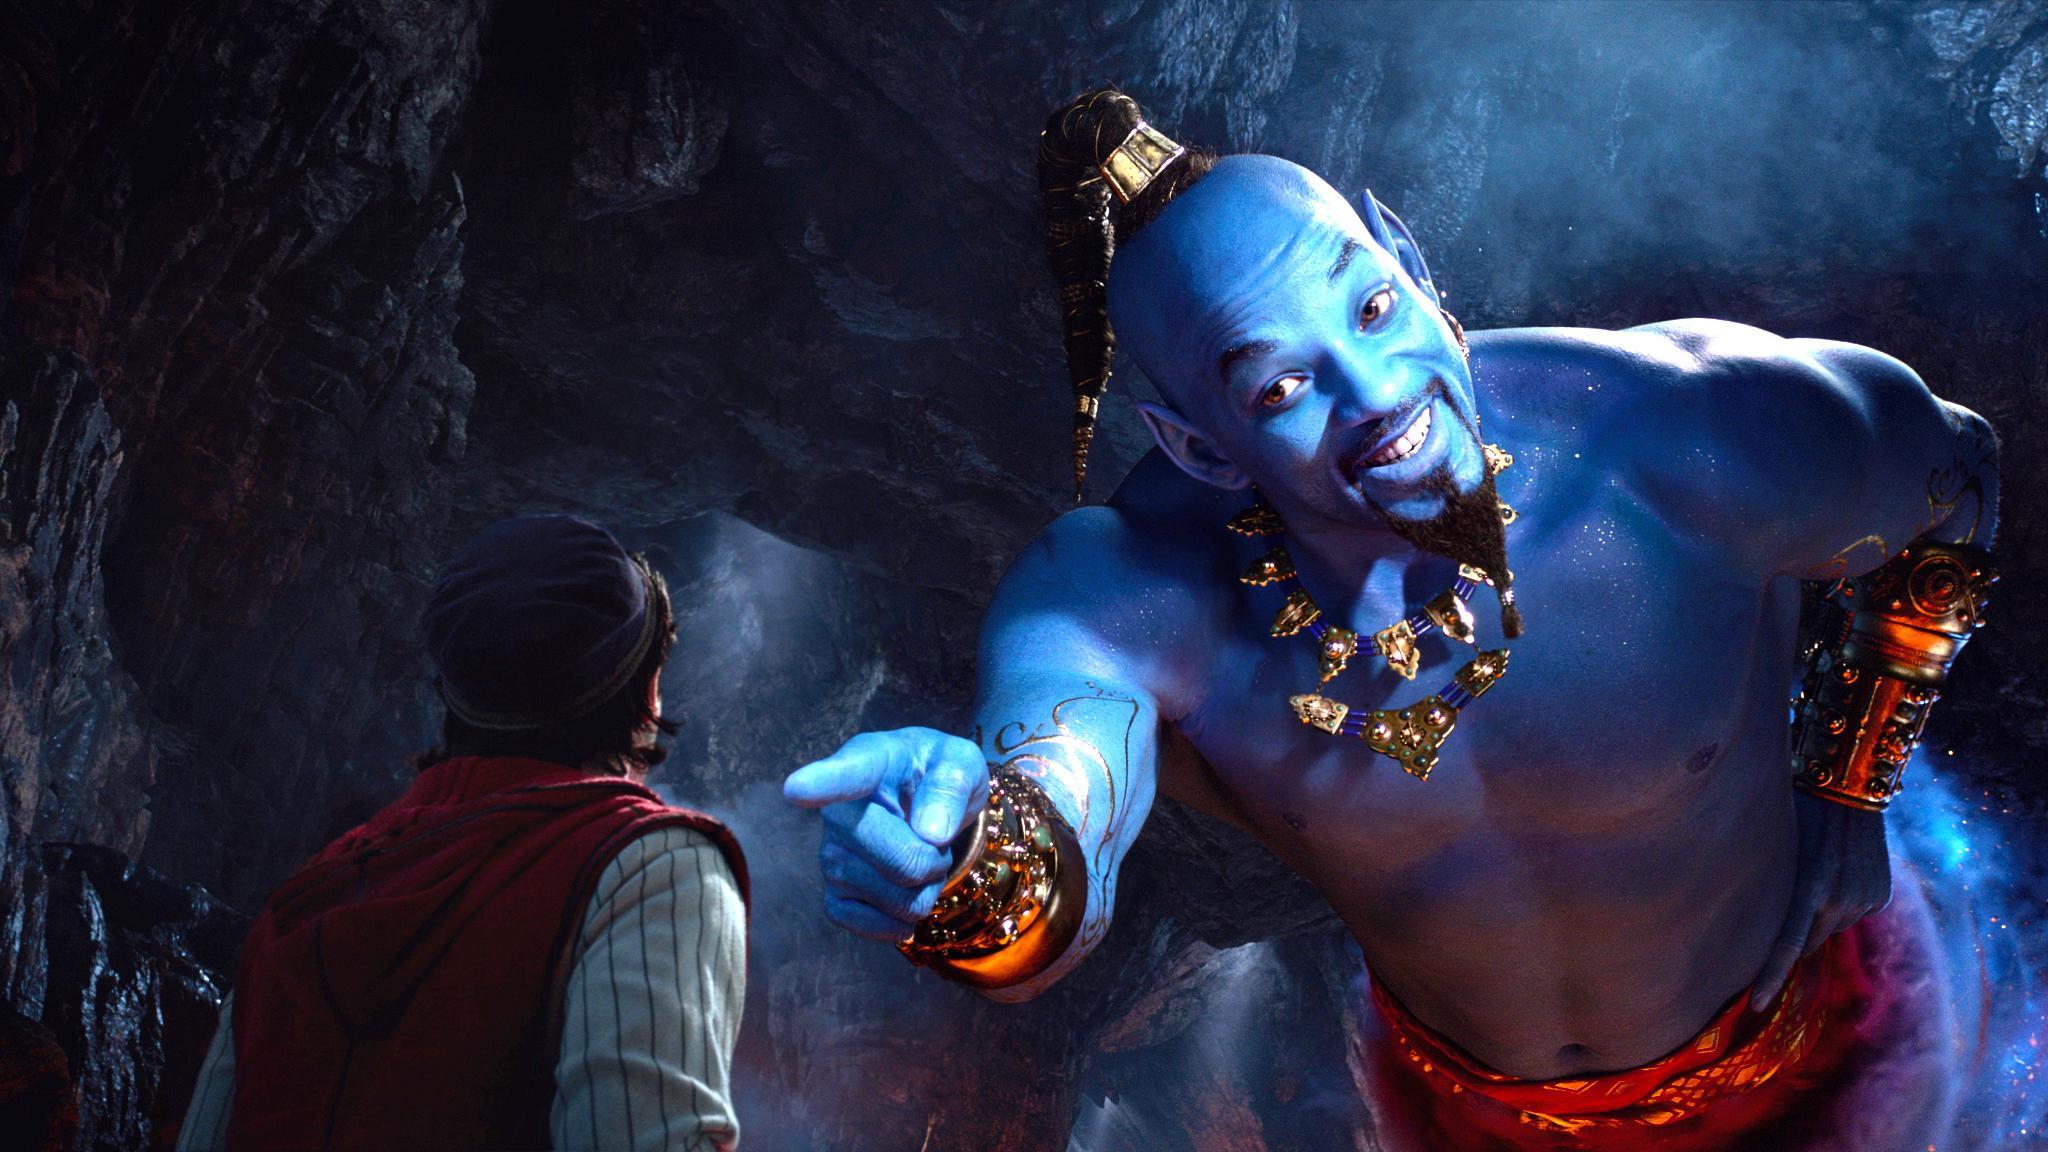 Aladdin' Is 2019's Most Uncanny Valley Movie So Far